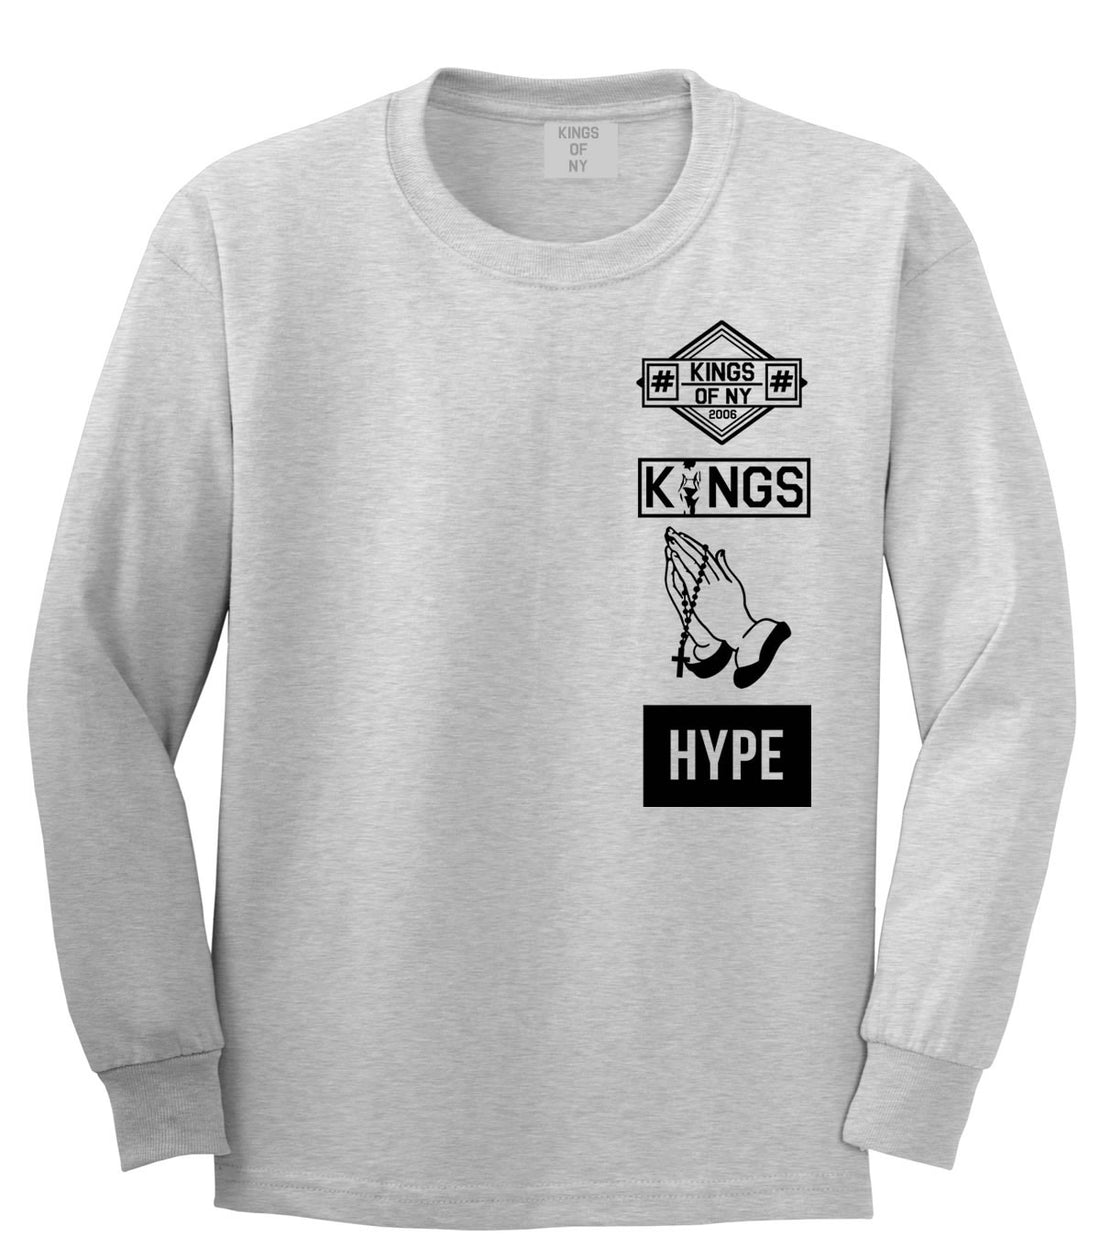 Prayer Hands Hype Left Logos Long Sleeve T-Shirt in Grey By Kings Of NY